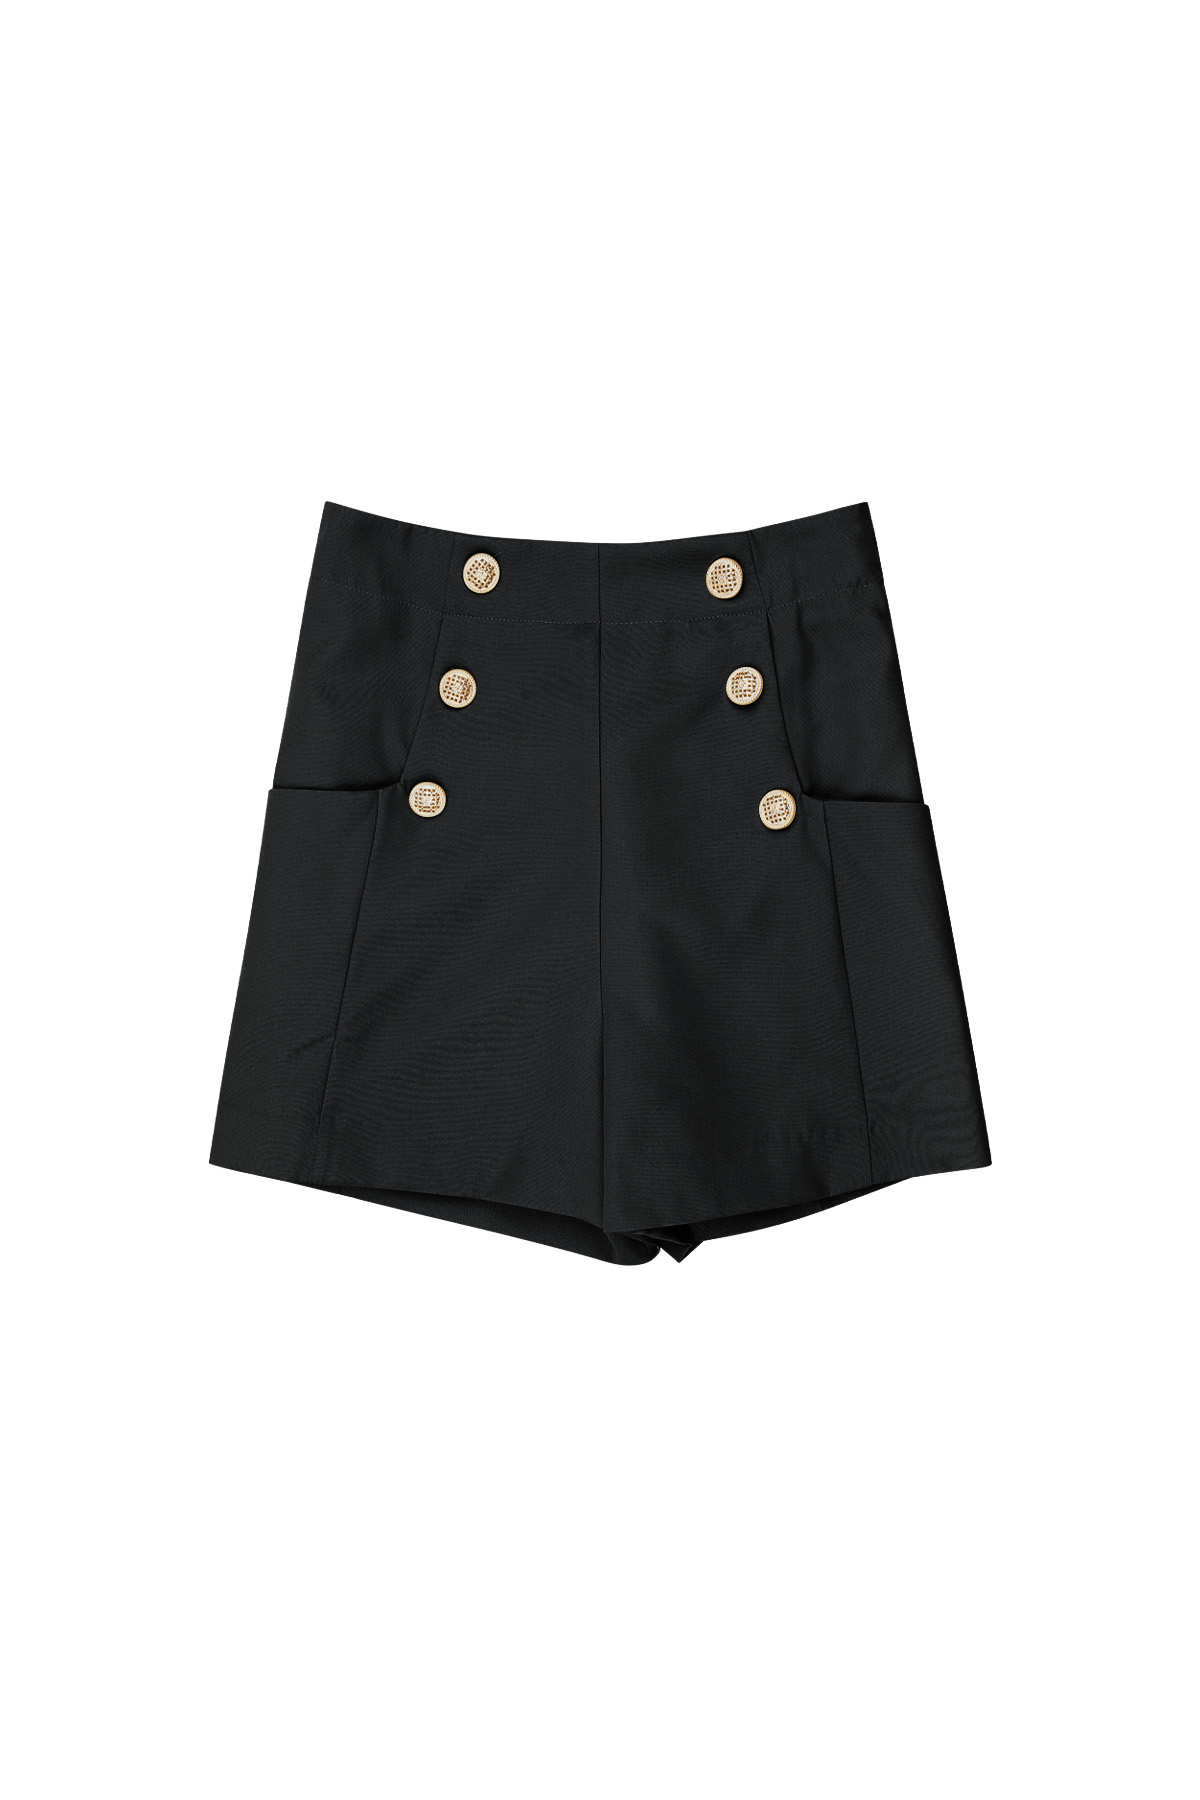 Shorts with gold buttons - black